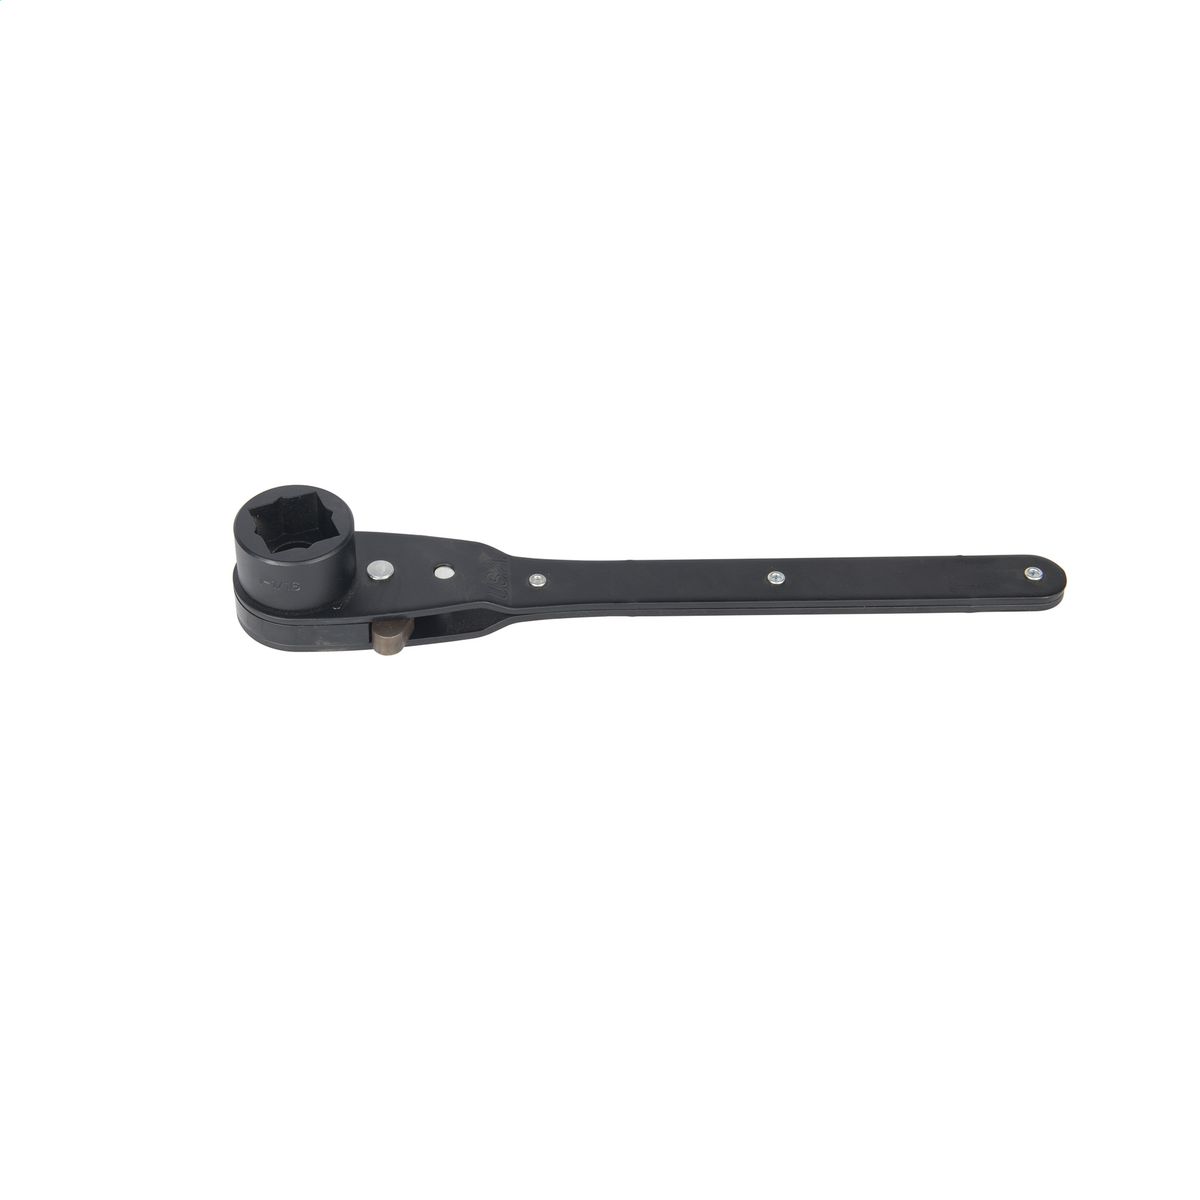 Ratchet Wrench for Trunnions | M19483 | Hubbell Power Systems